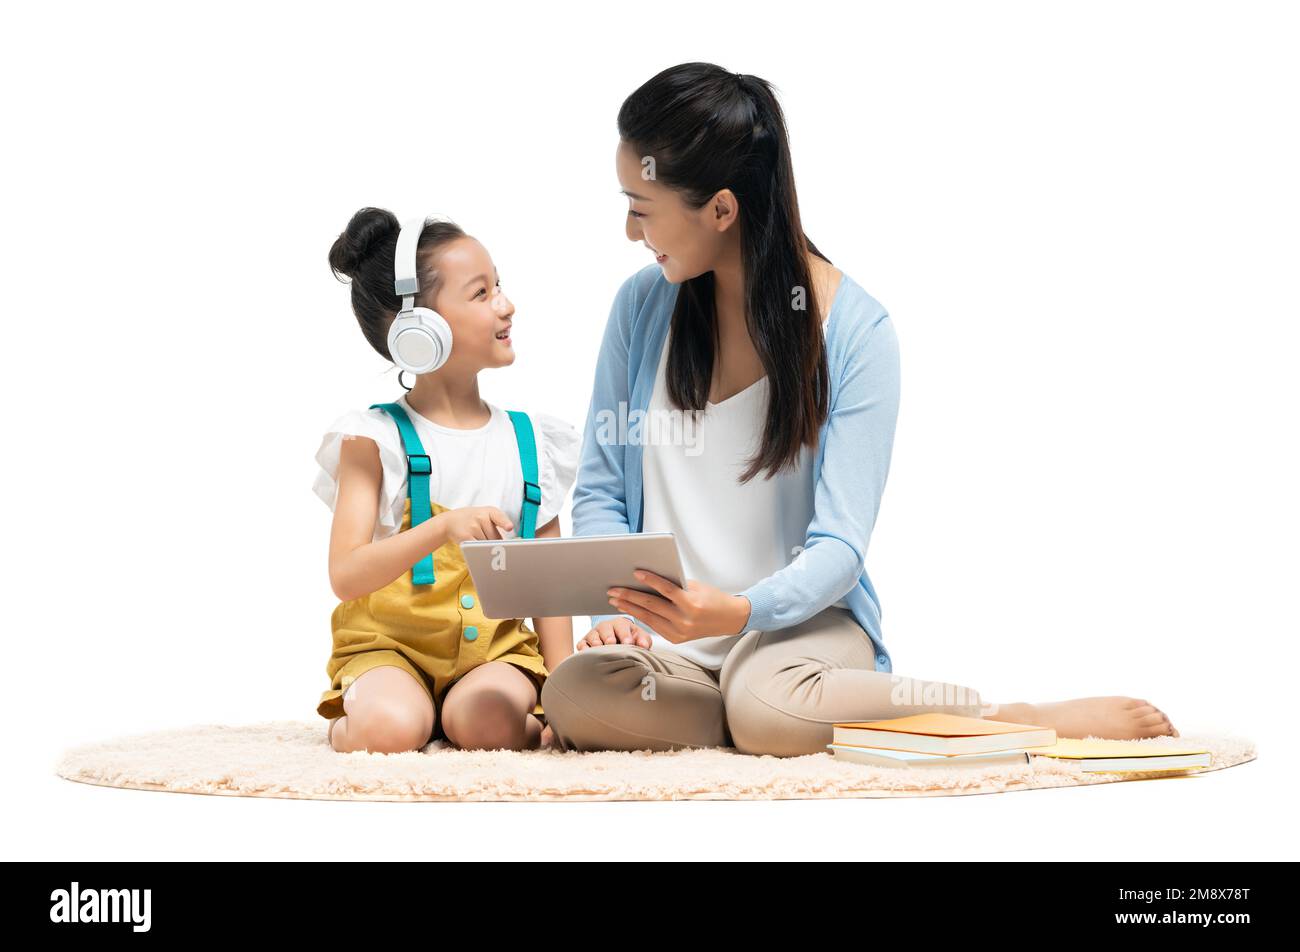 A young female teacher counseling students learning Stock Photo